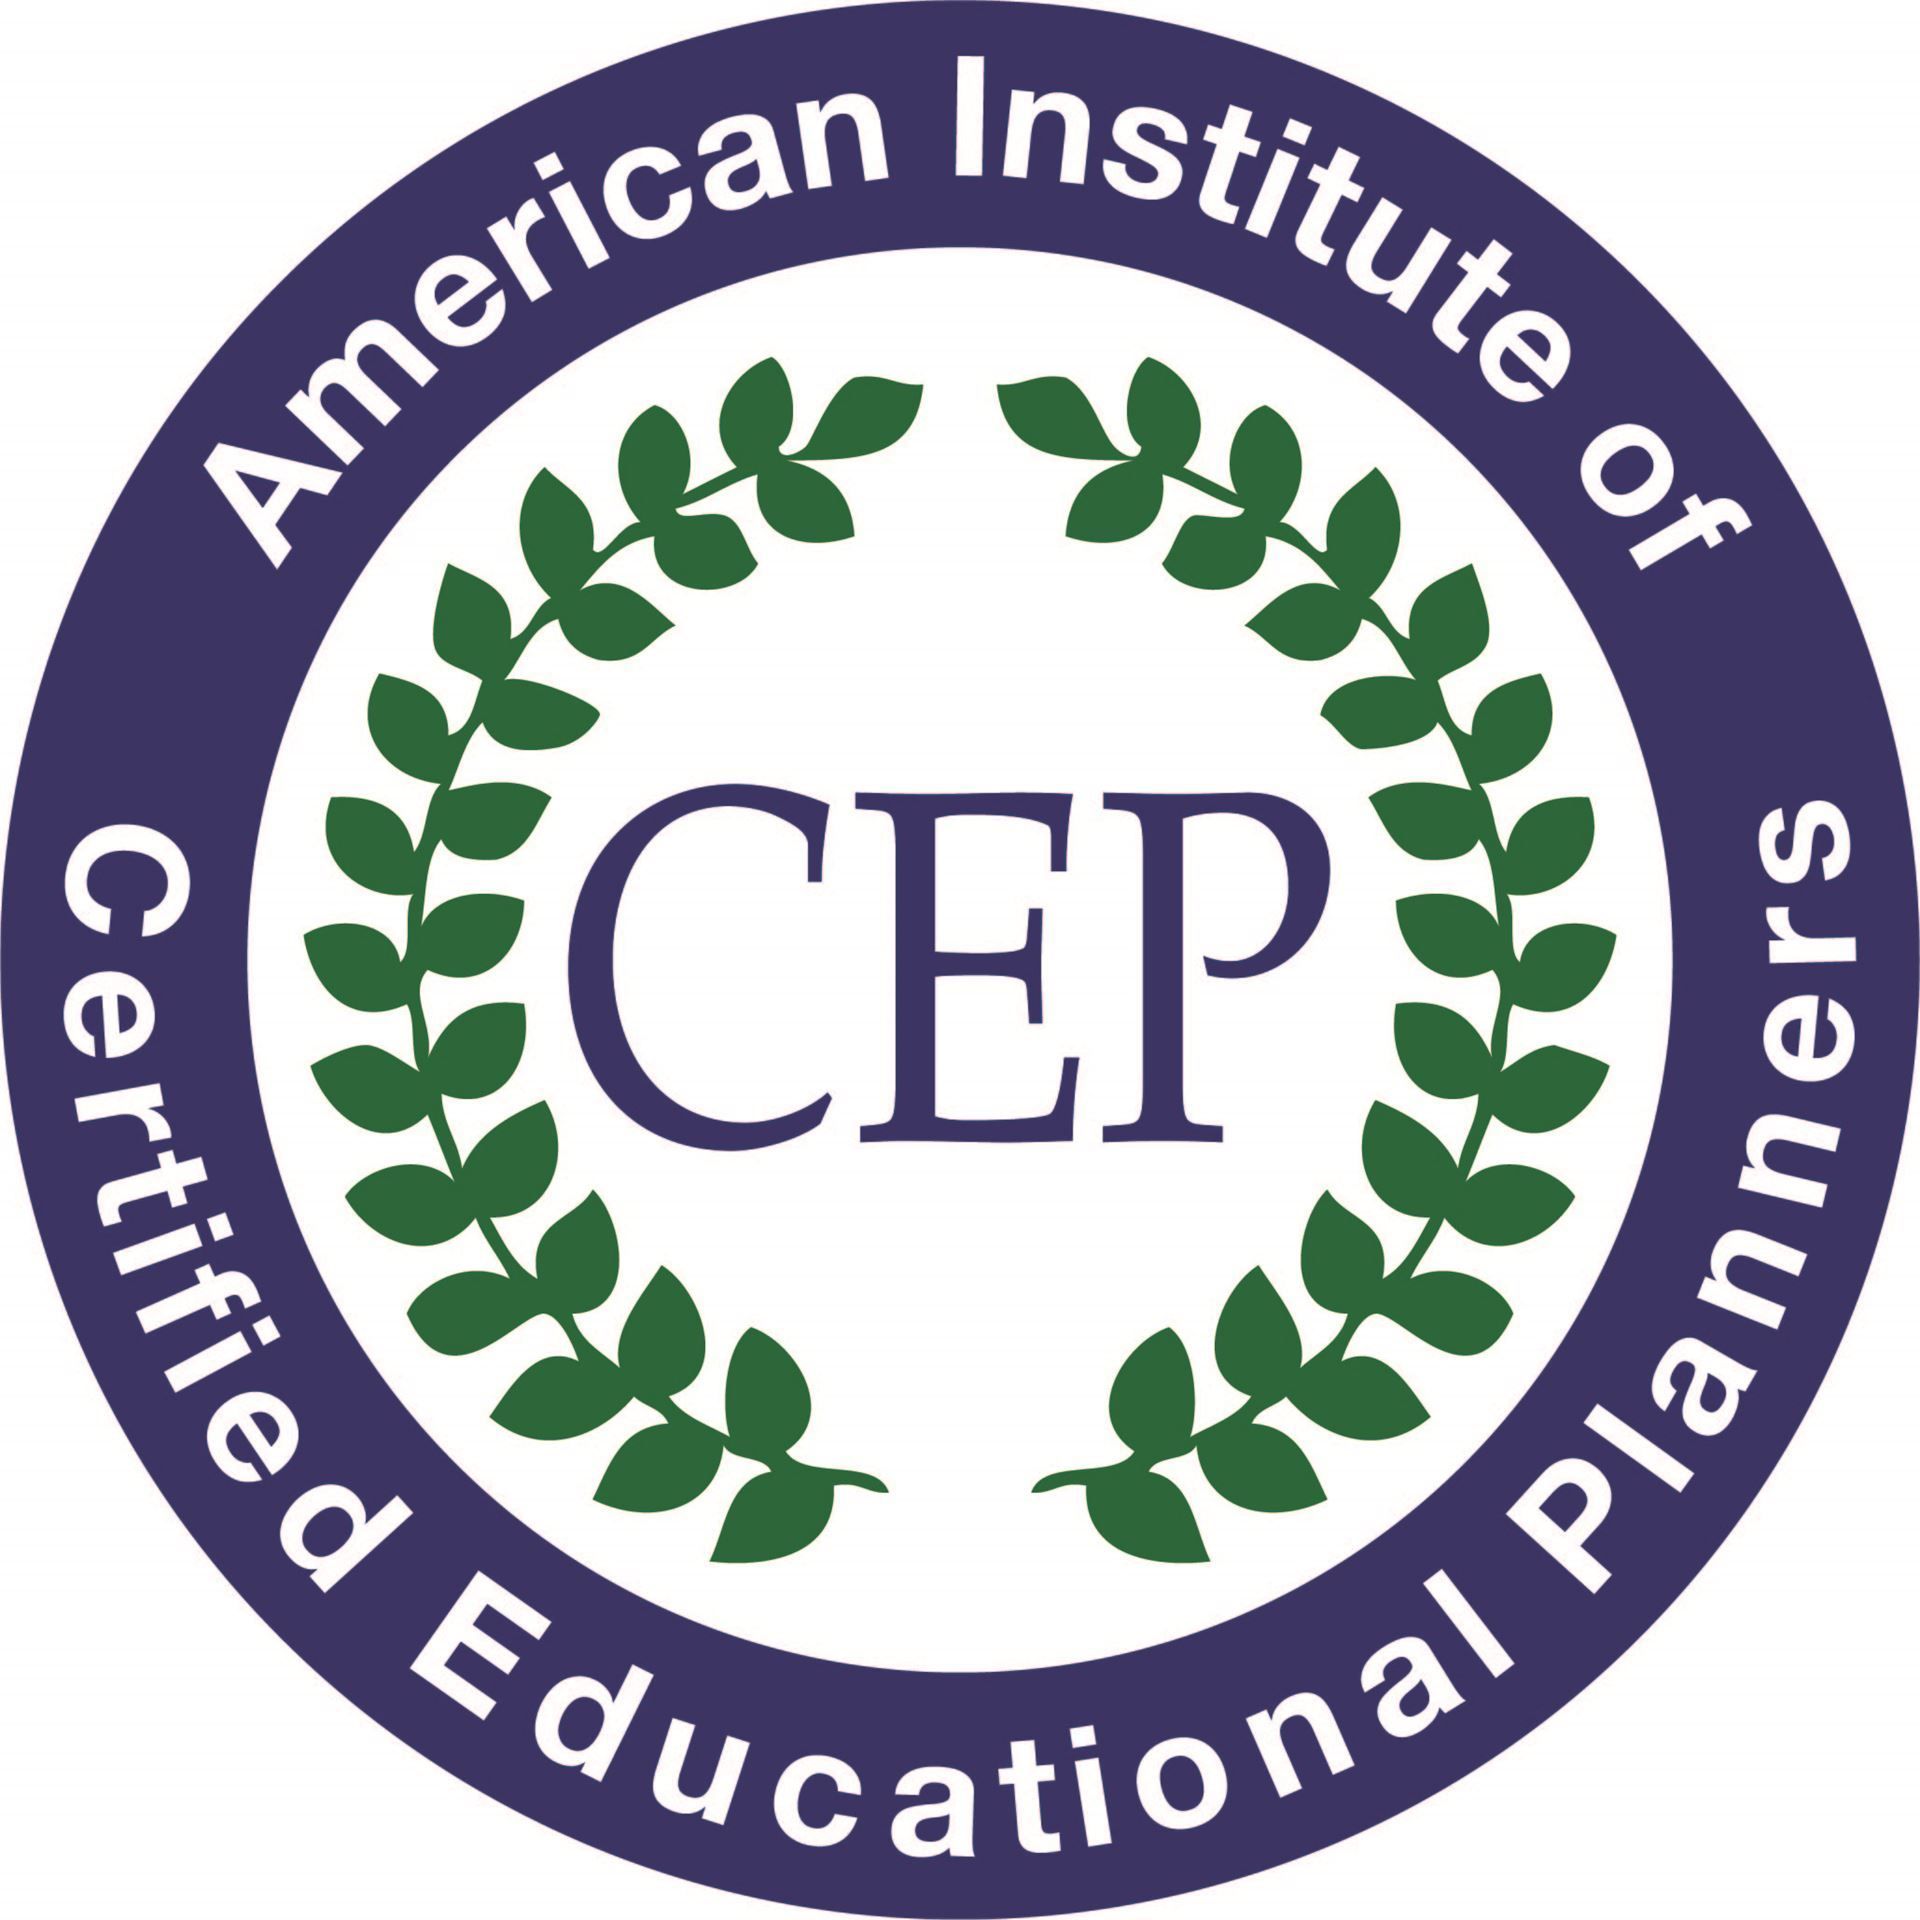 American Institute of Certified Educational Planners logo